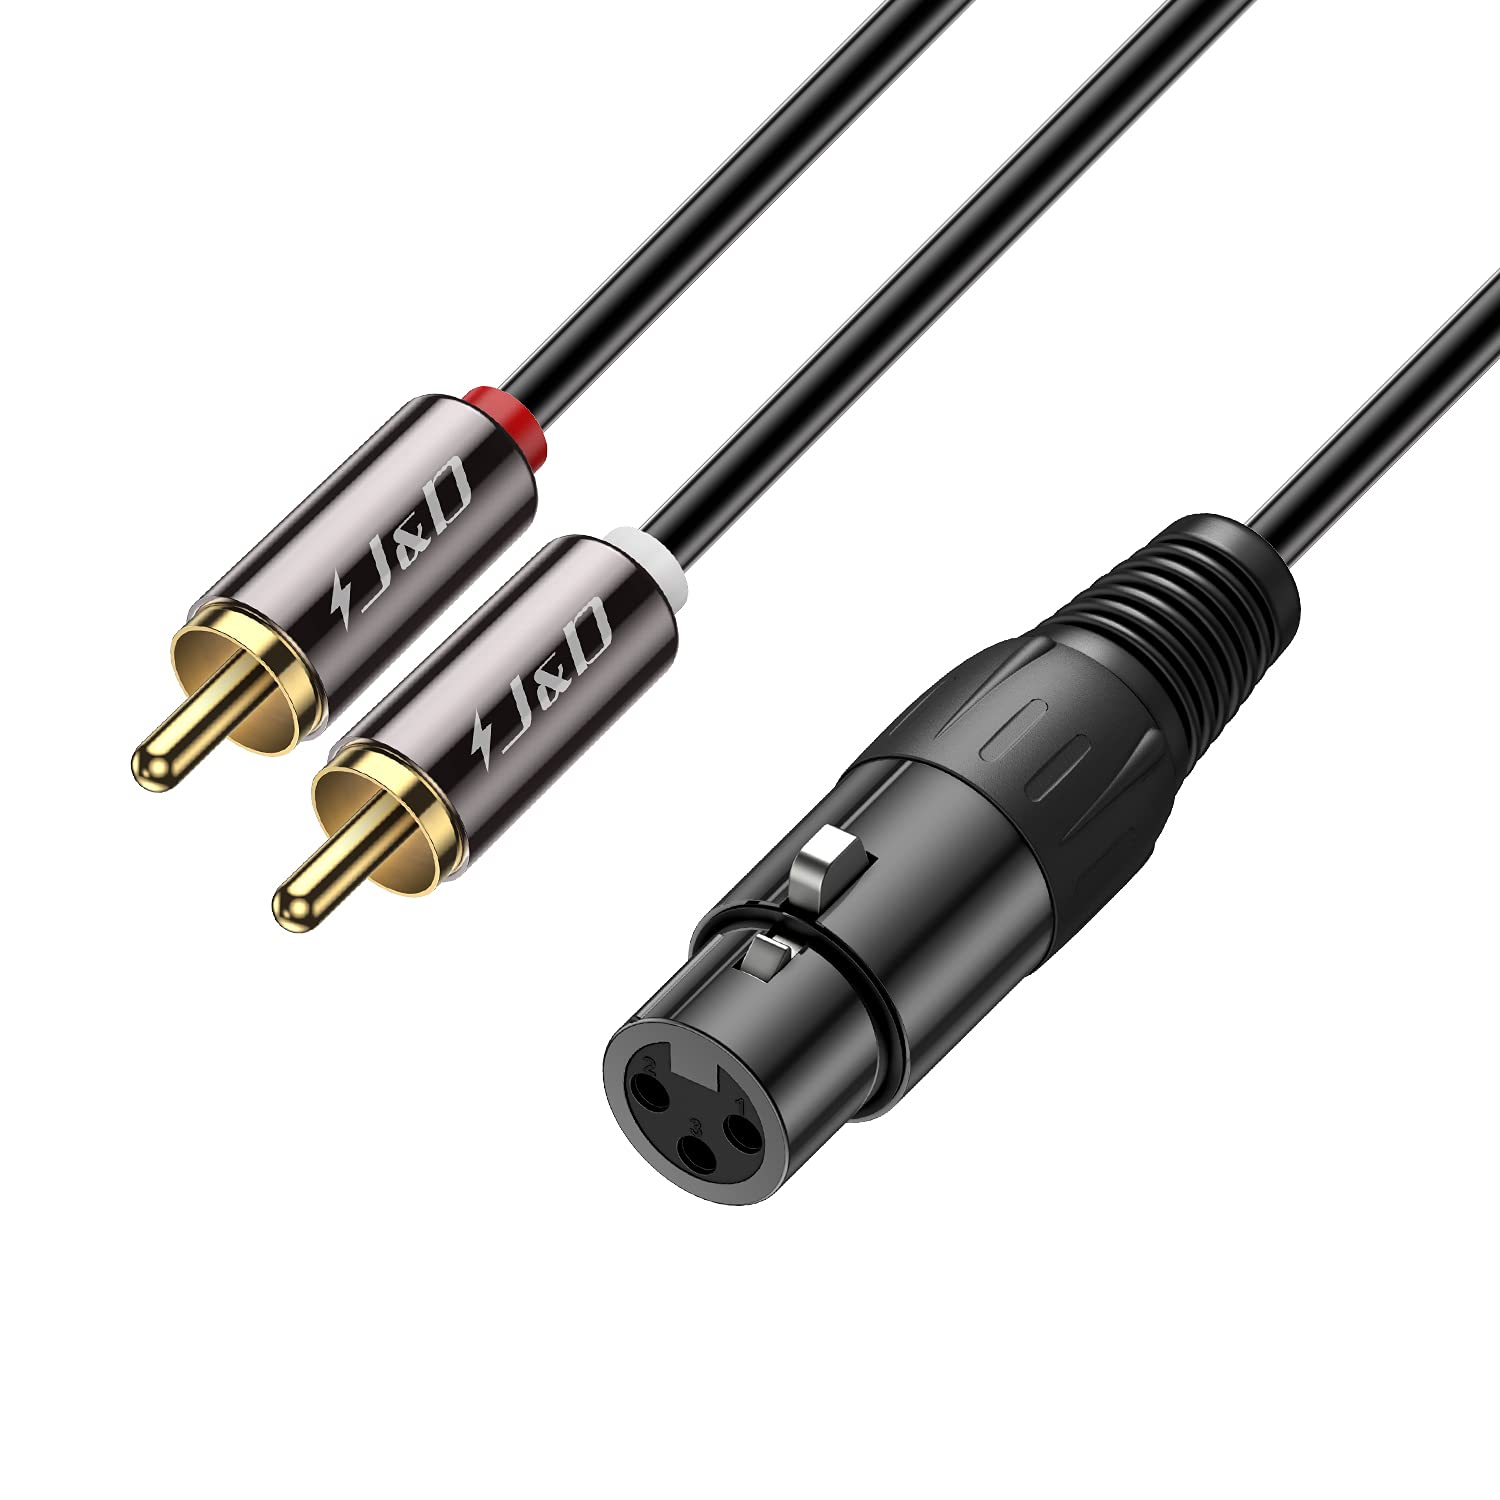 How to Make XLR to 3.5mm Stereo Cable  Dual XLR Female to 3.5mm Jack 